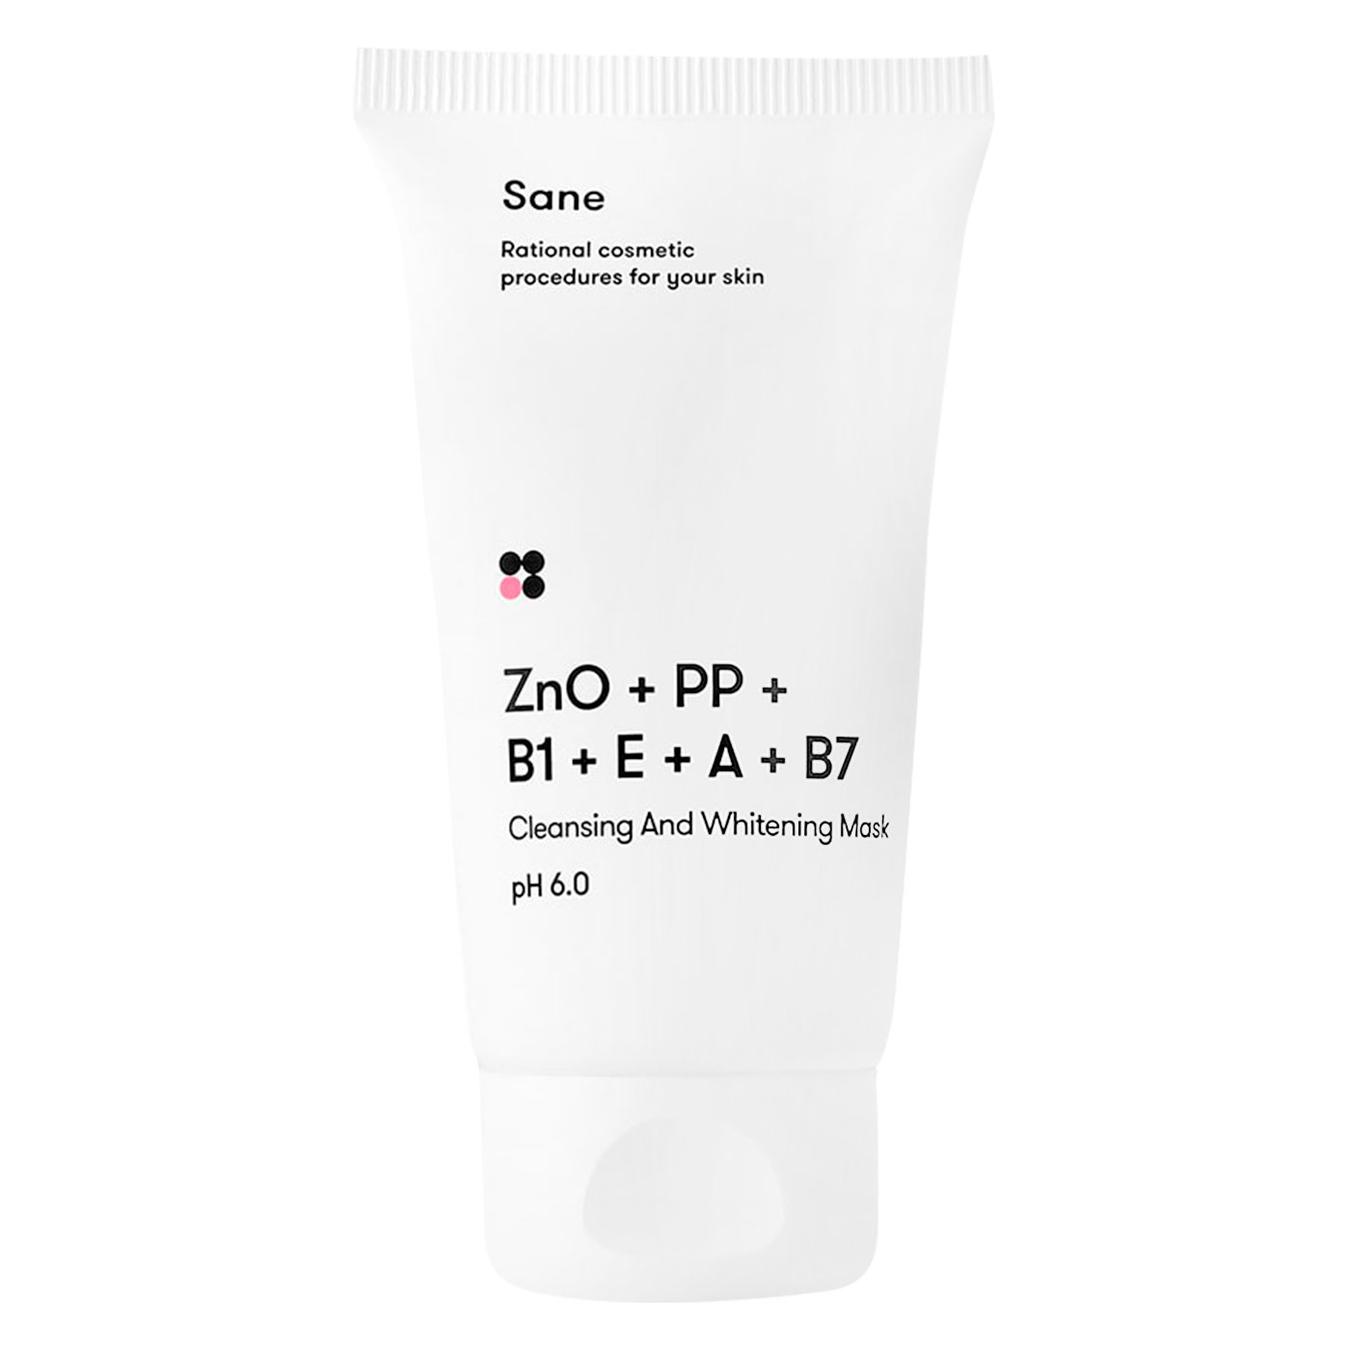 Sane cleansing and whitening face mask with zinc oxide and vitamins PP, B1, E, A, B7 75ml